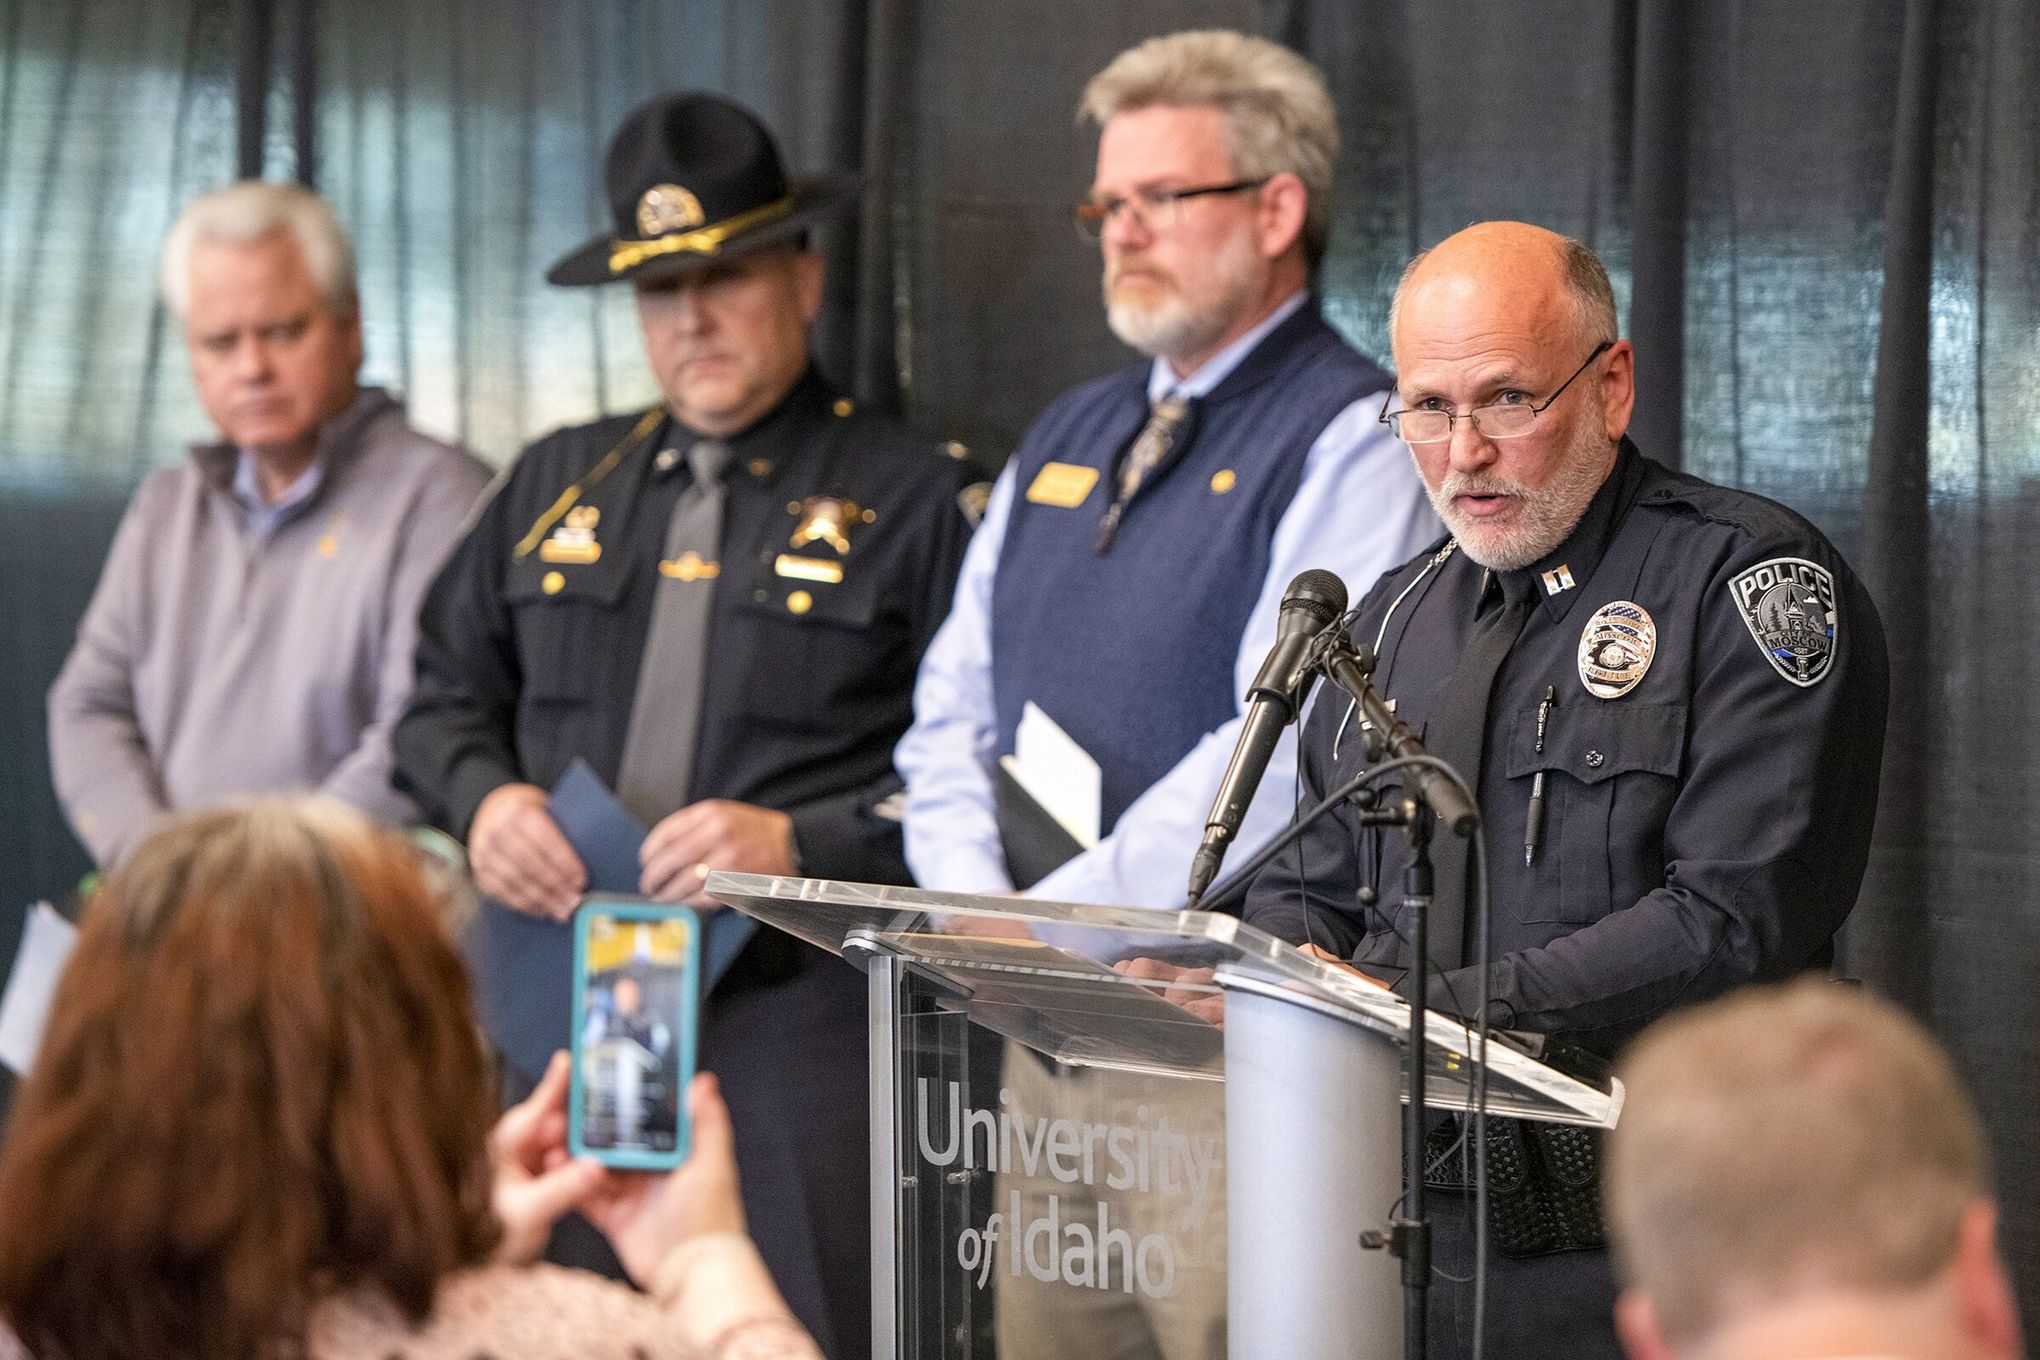 Idaho student killings: Moscow police say a sixth person on the lease isn't  involved in the murders